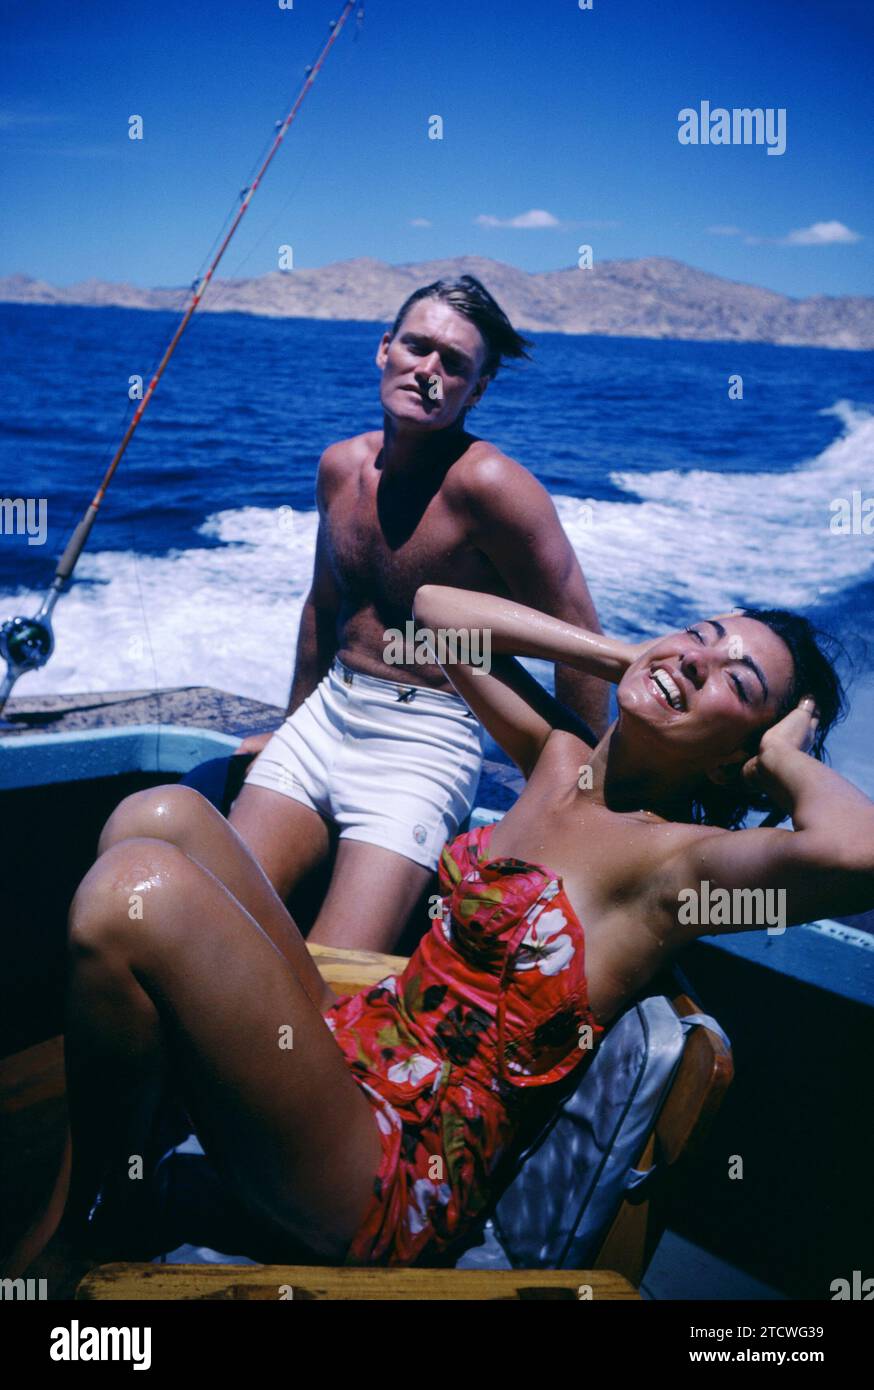 BAJA CALIFORNIA, MEXICO - JUNE, 1962:  Actor and former baseball player Chuck Connors (1921-1992) and actress fiance Kamala Devi (1934-2010) relax on a boat during a fishing trip circa June, 1962 in Baja California, Mexico.  (Photo by Hy Peskin) *** Local Caption *** Chuck Connors;Kamala Devi Stock Photo